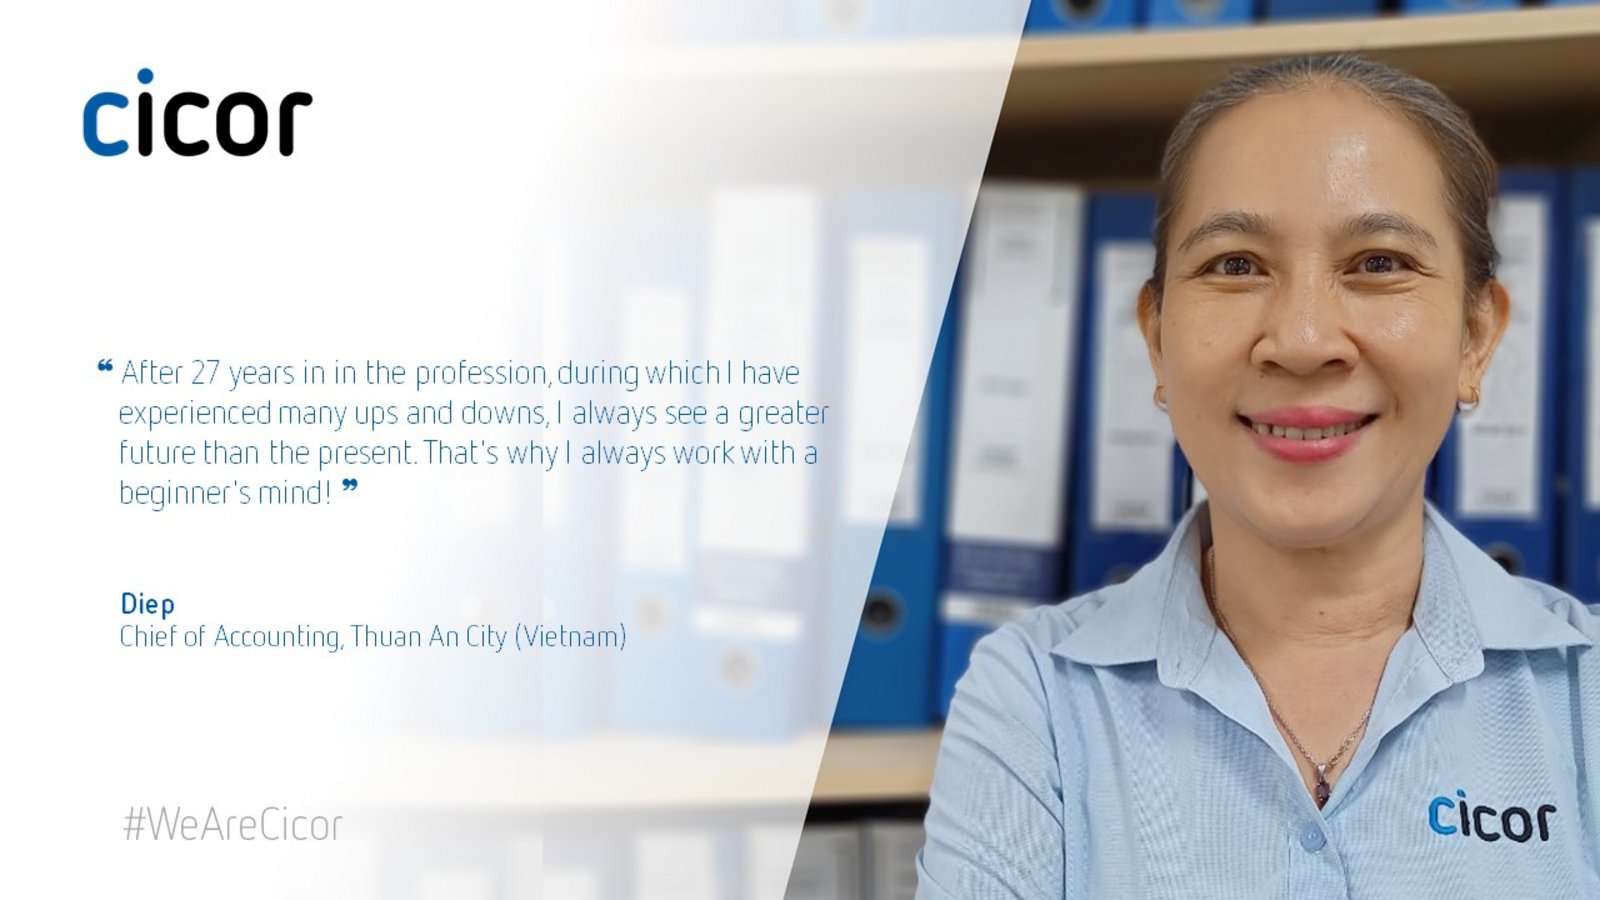 Testimonial of Diep who works at the Cicor site in Thuan An City